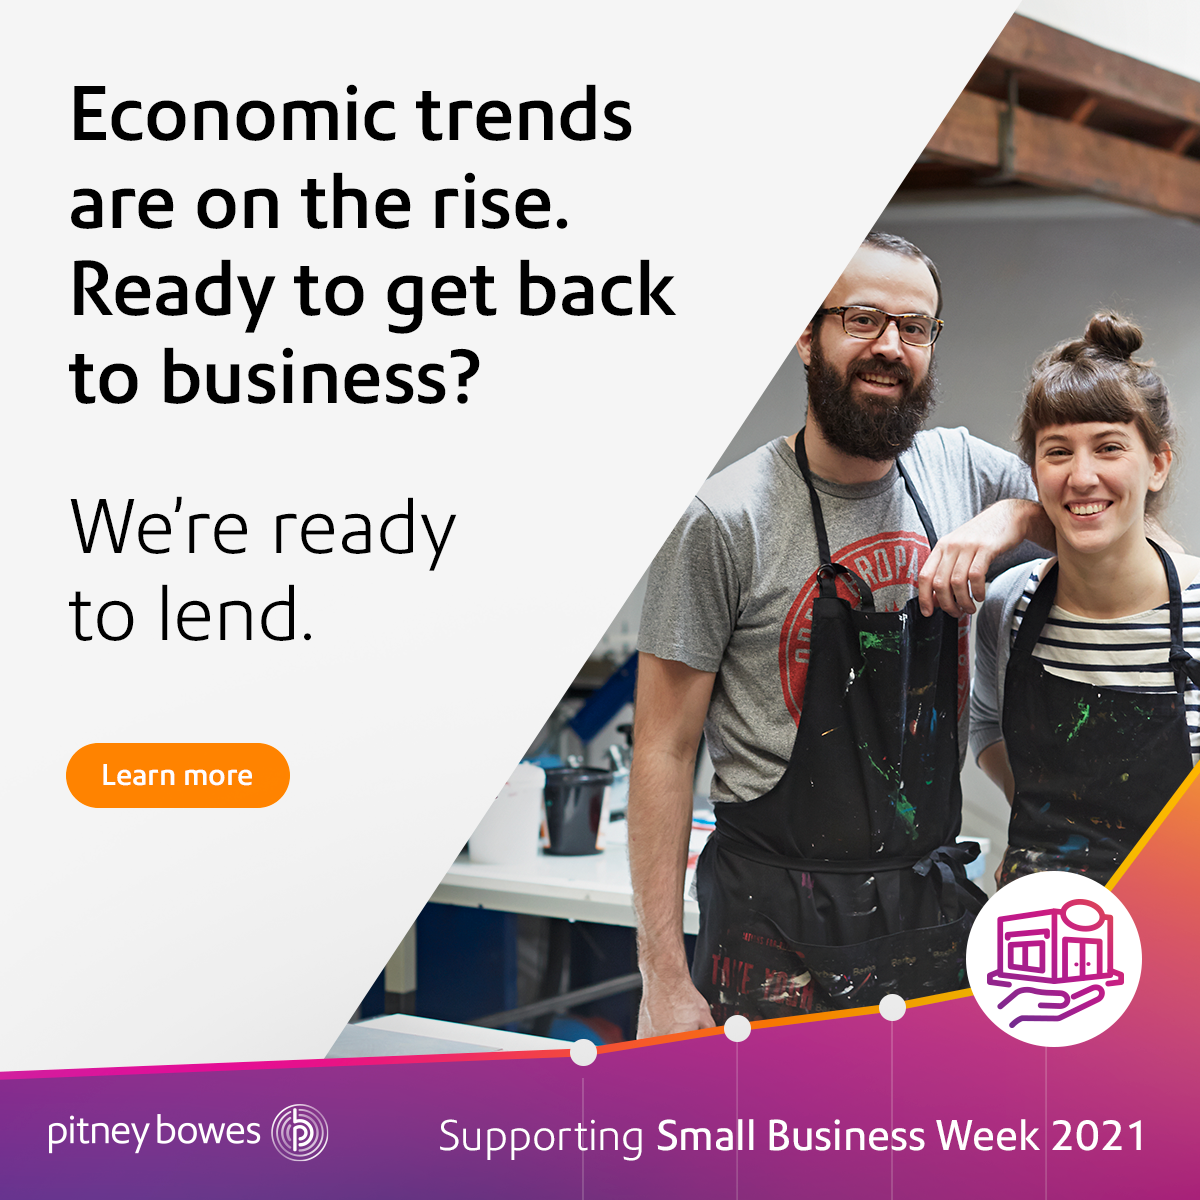 Small Business Week marketing campaign for Pitney Bowes - Joseph Ehlinger copywriter